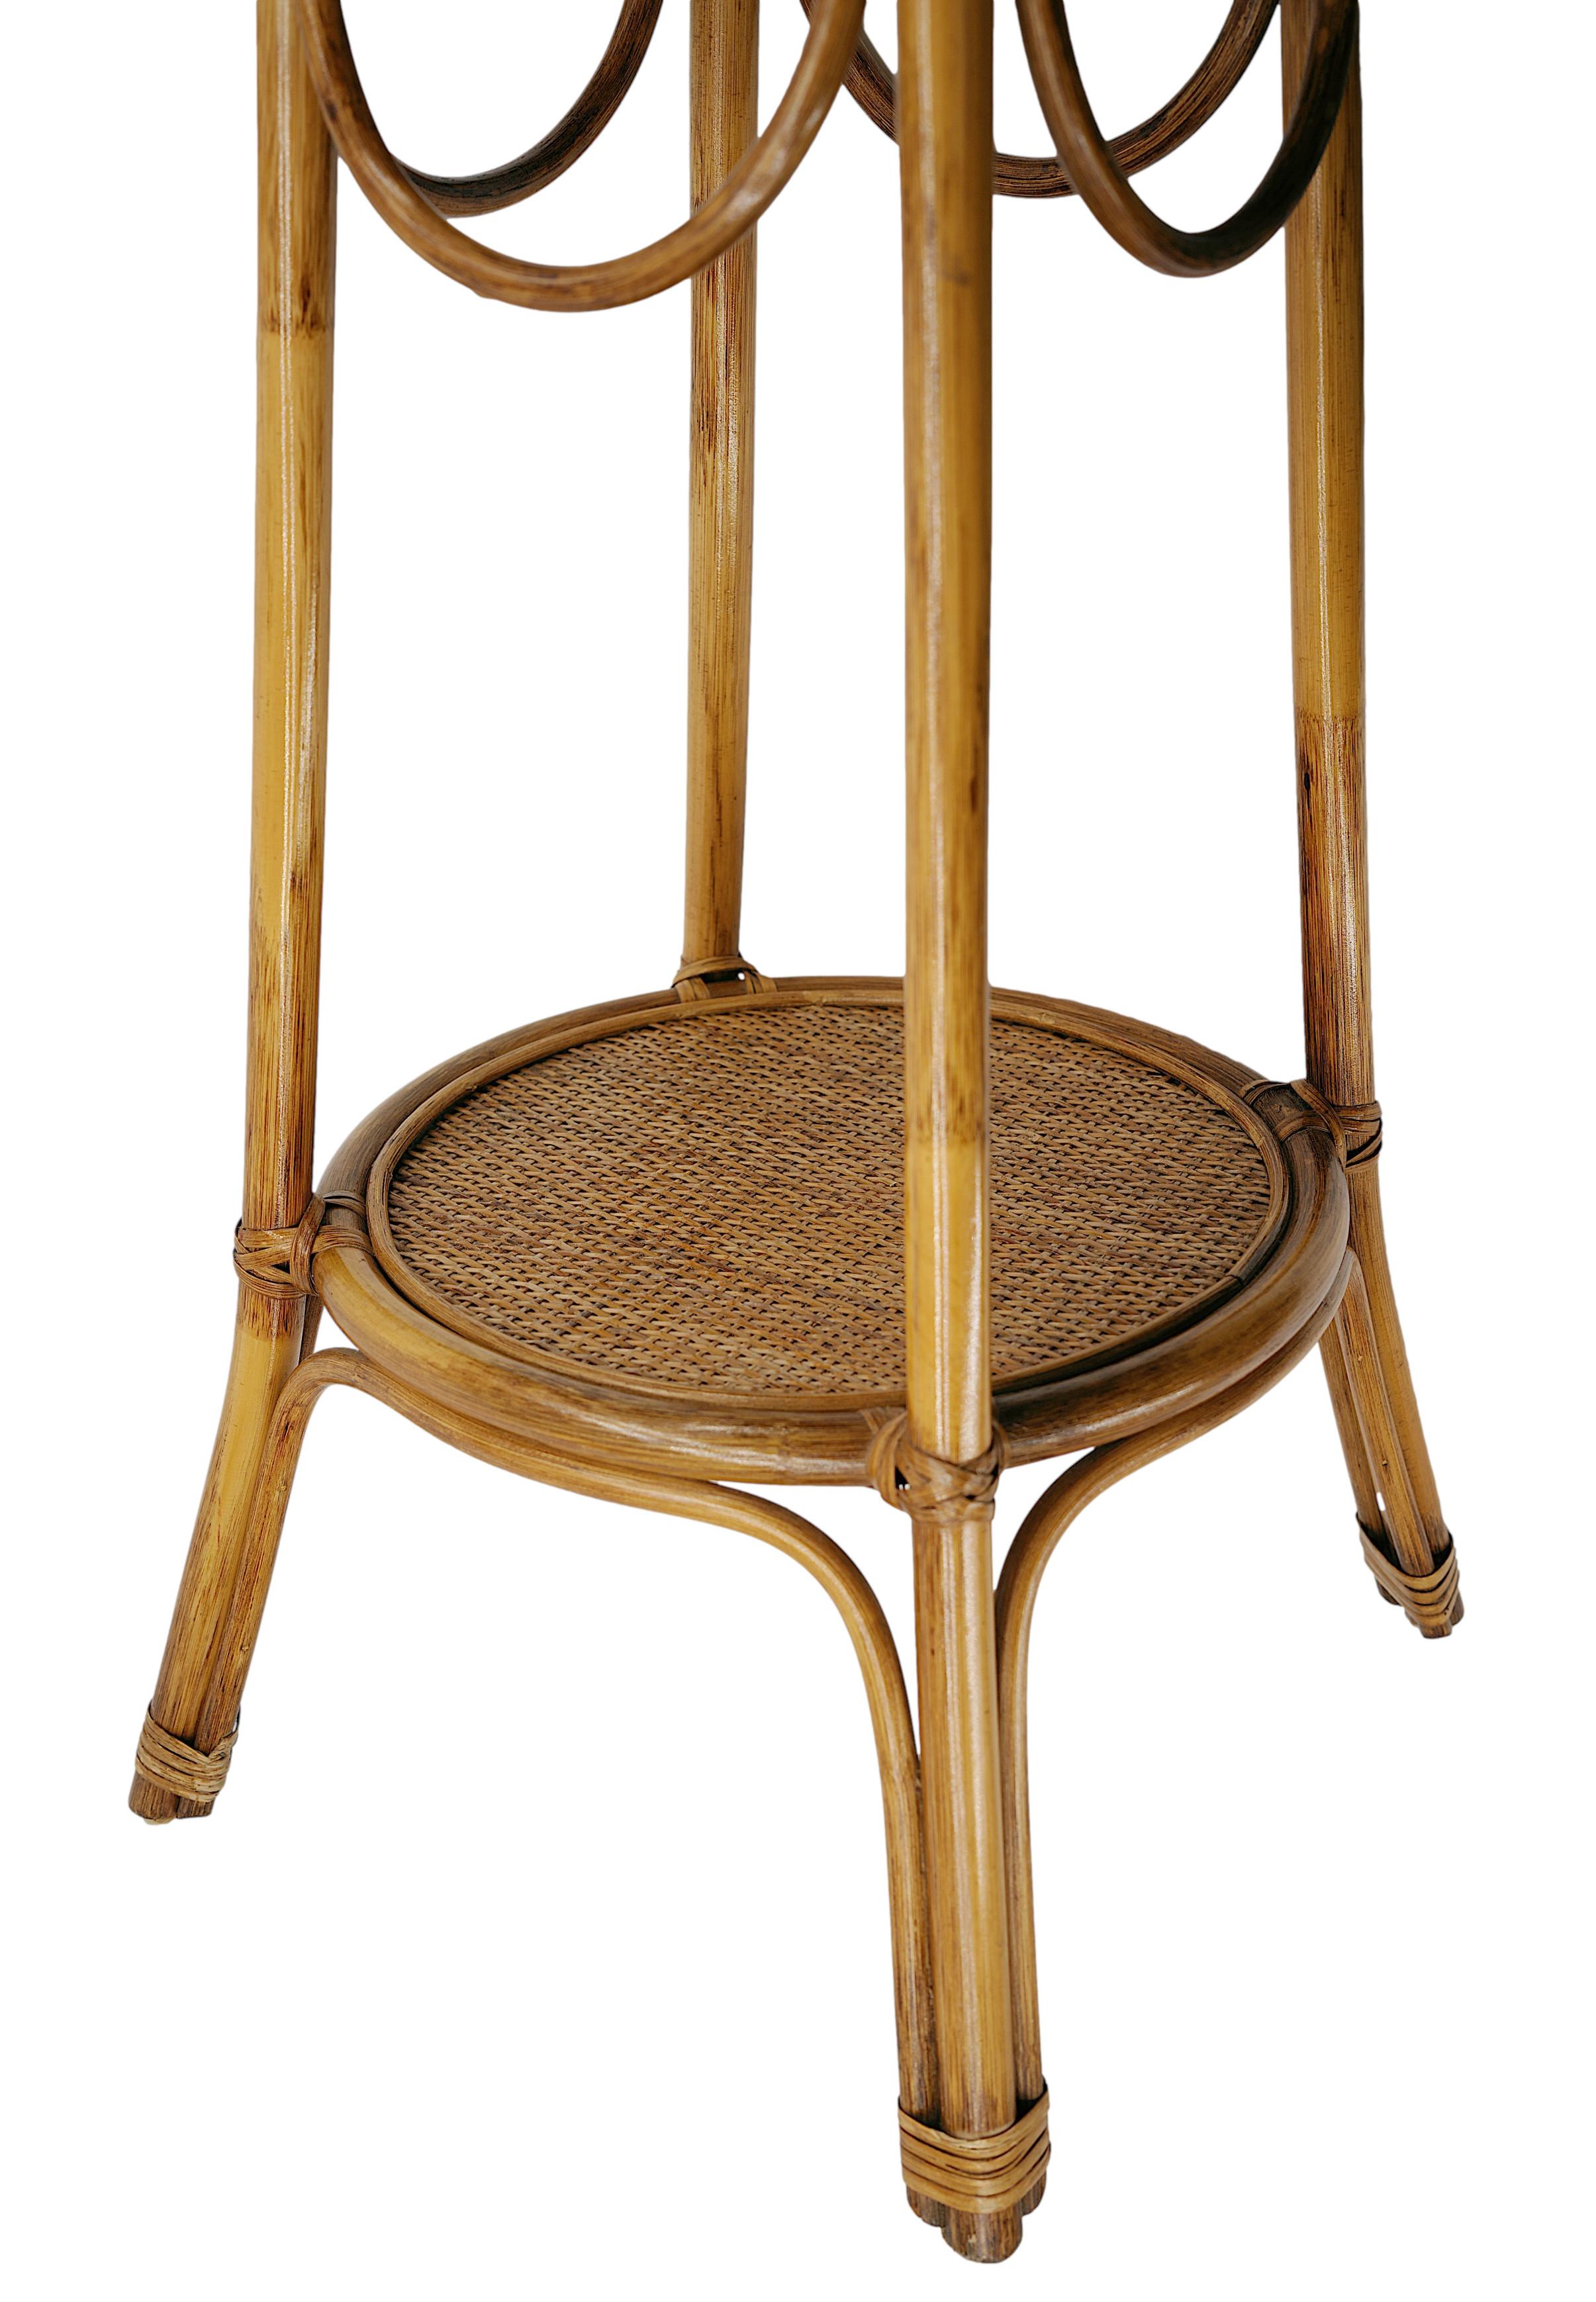 Mid-20th Century French Rattan & Bamboo Harness Table, 1950s For Sale